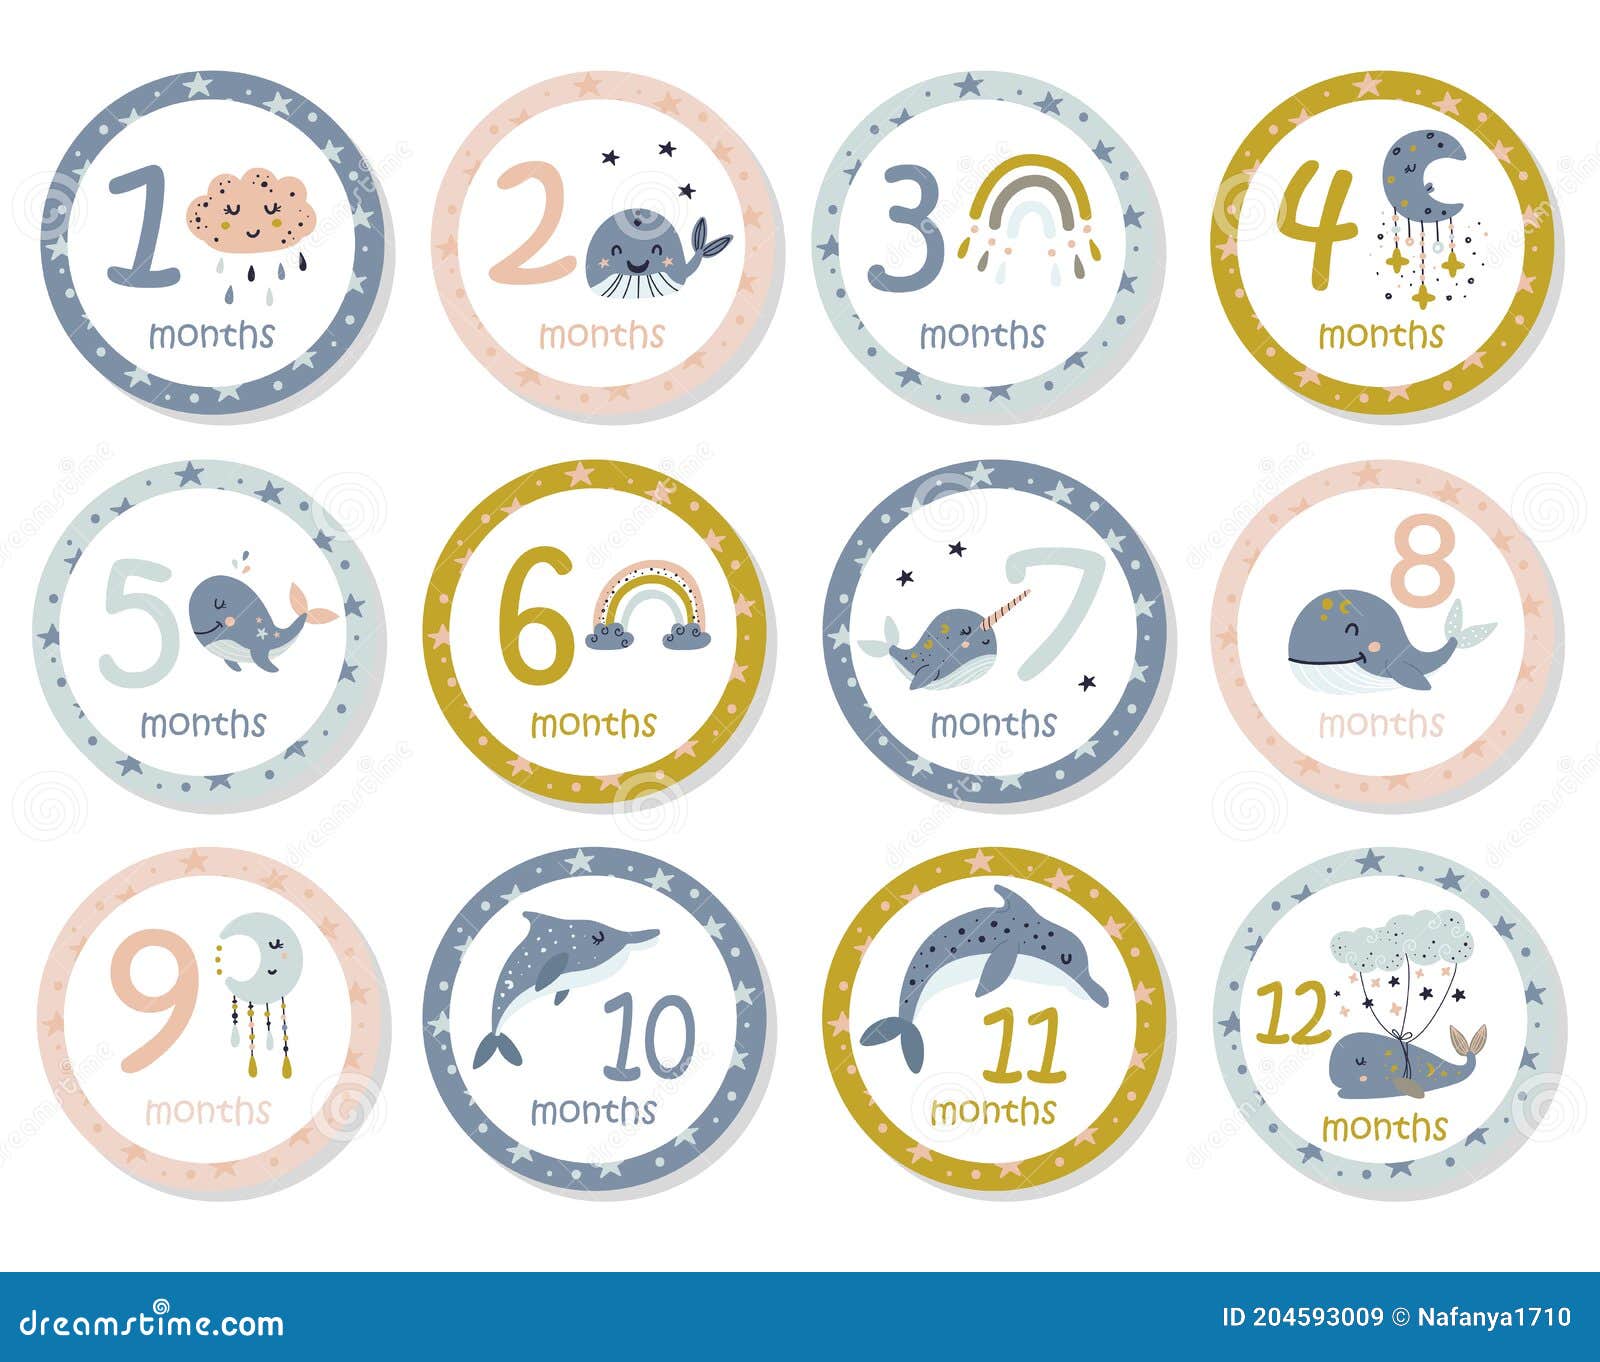 monthly baby stickers with cute whales